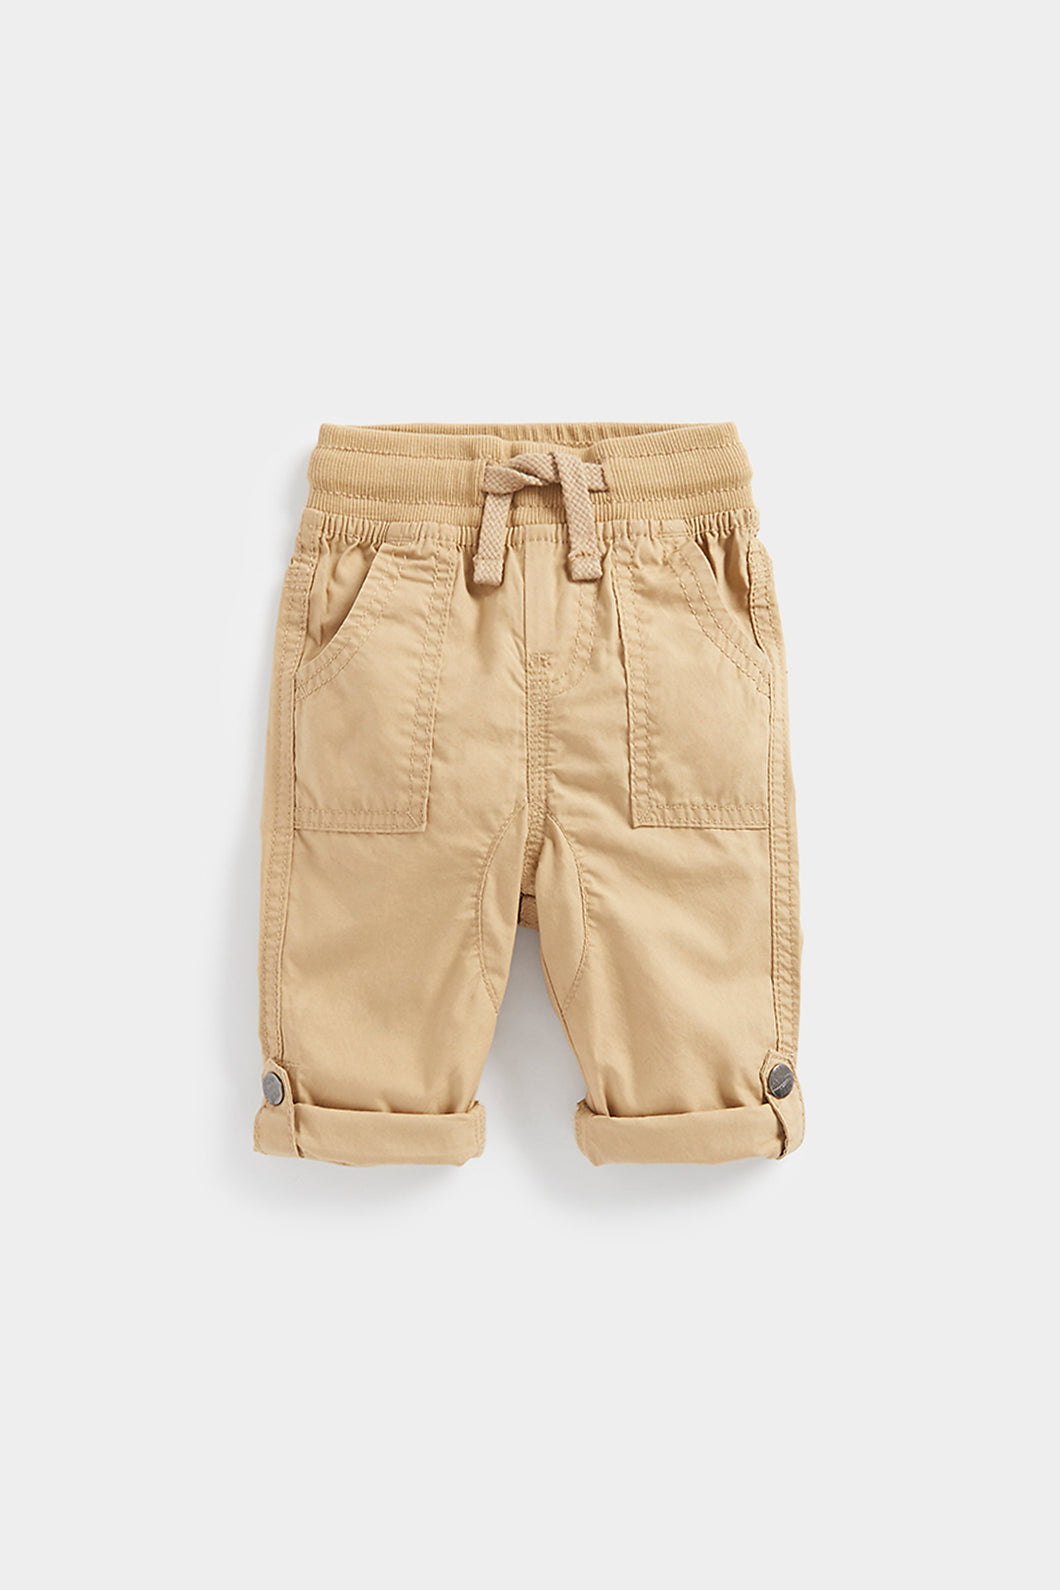 Mothercare Tan Poplin Roll-Up Trousers